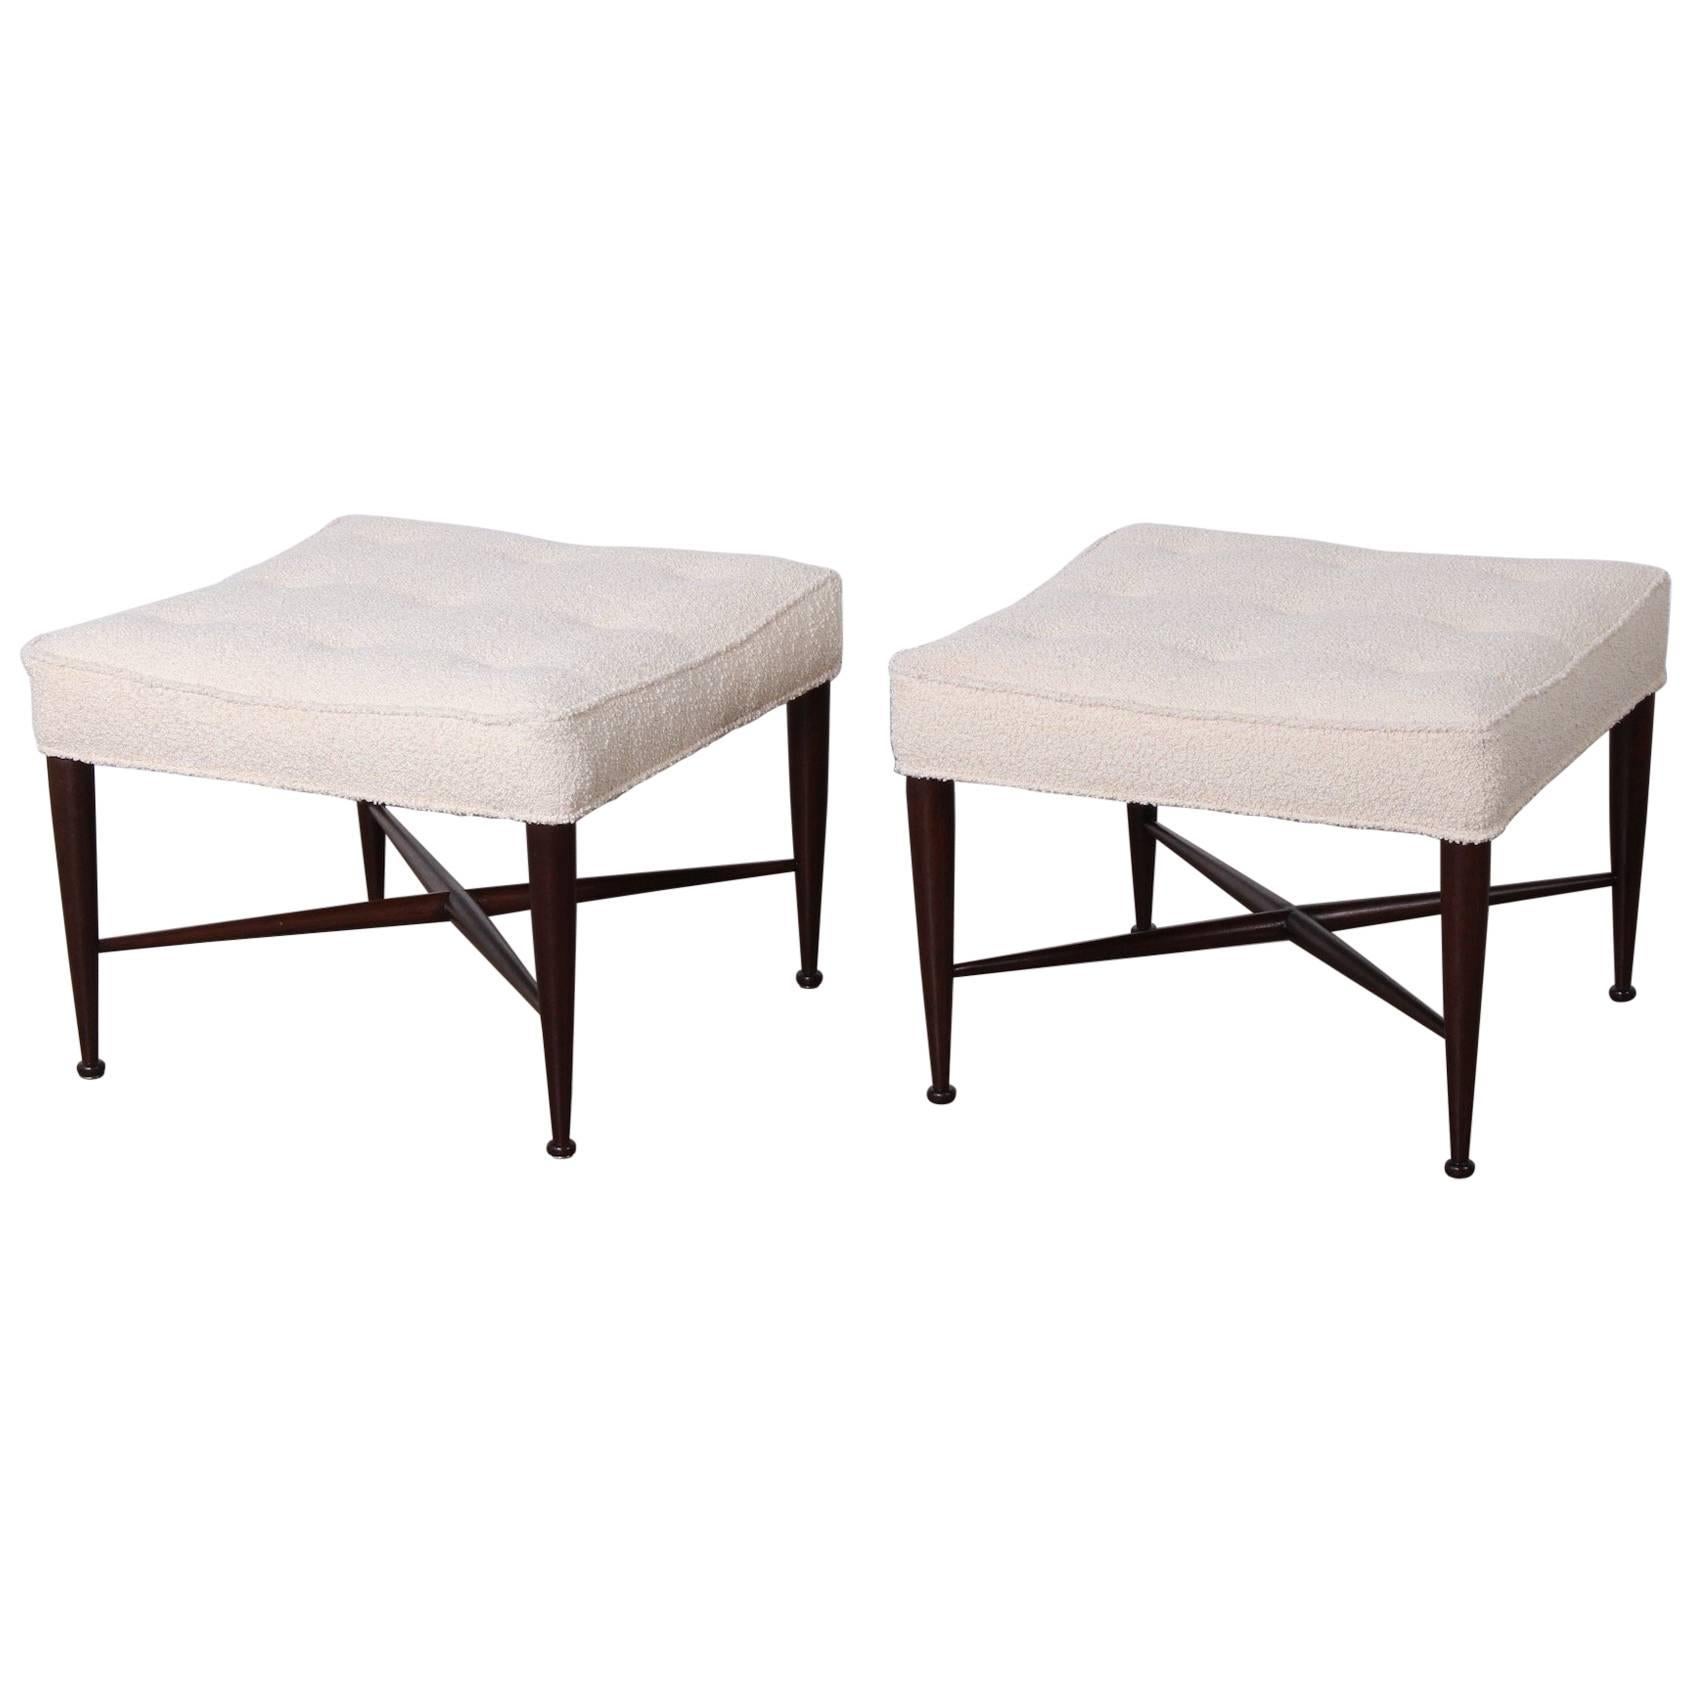 Pair of Thebes Stools by Edward Wormley for Dunbar